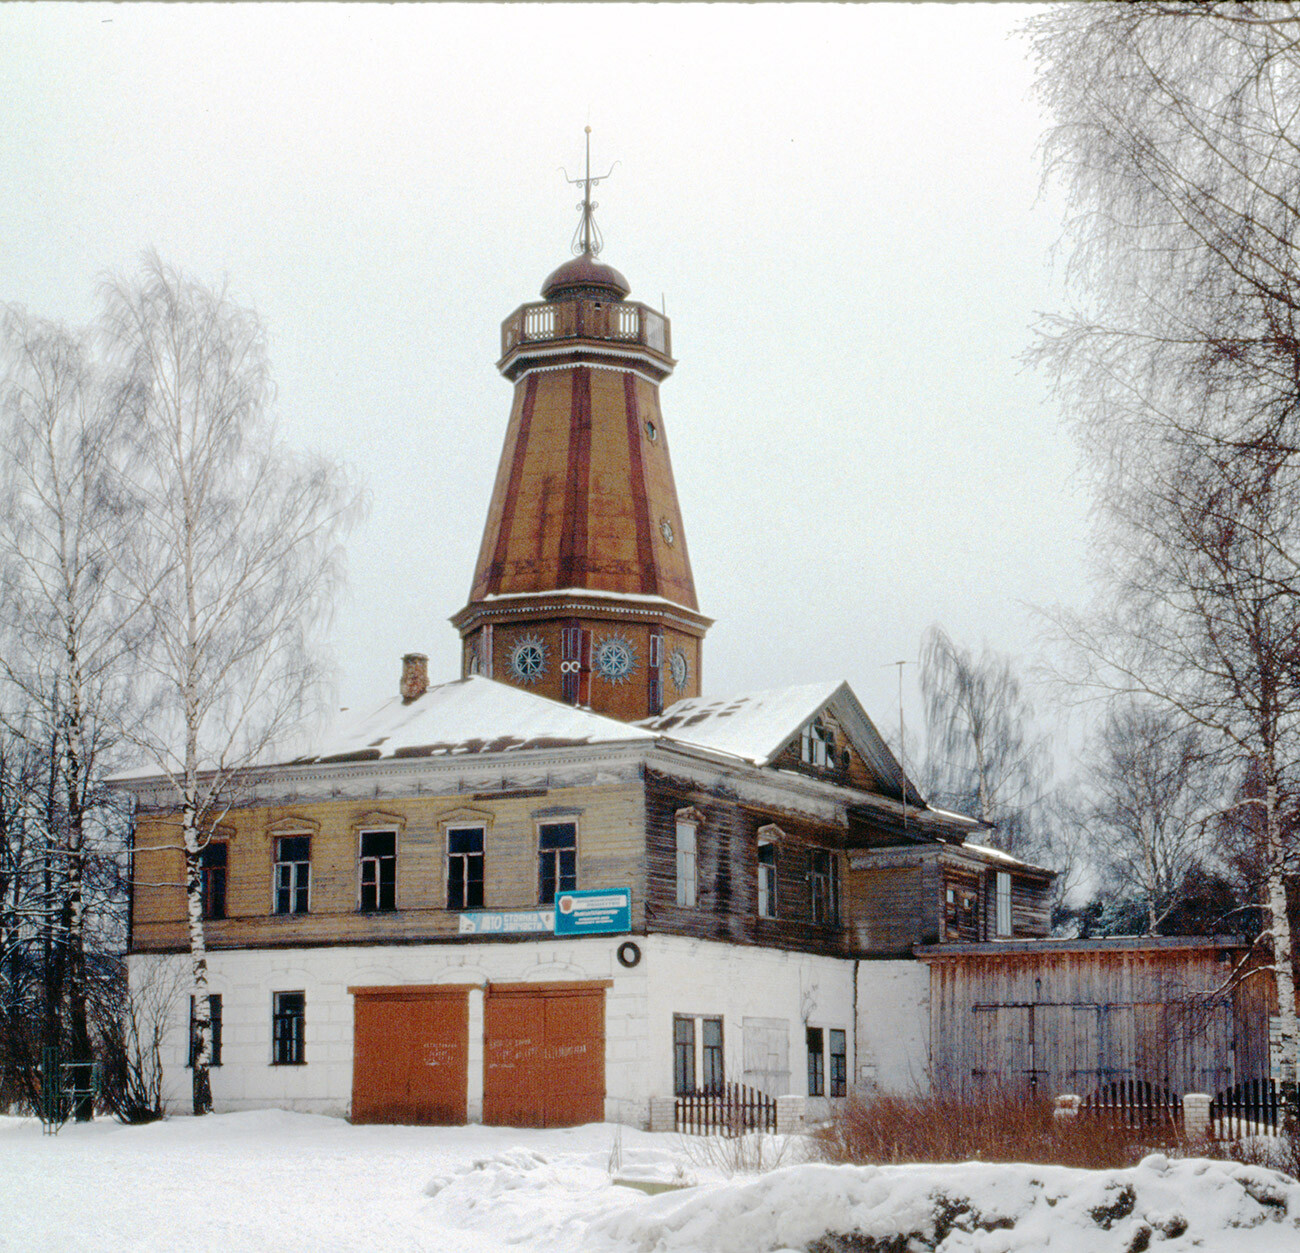  Former City Council (duma) building with fire tower. The entire wooden structure of this national landmark, built in 1887, burned at the end of 2000. March 10, 1998